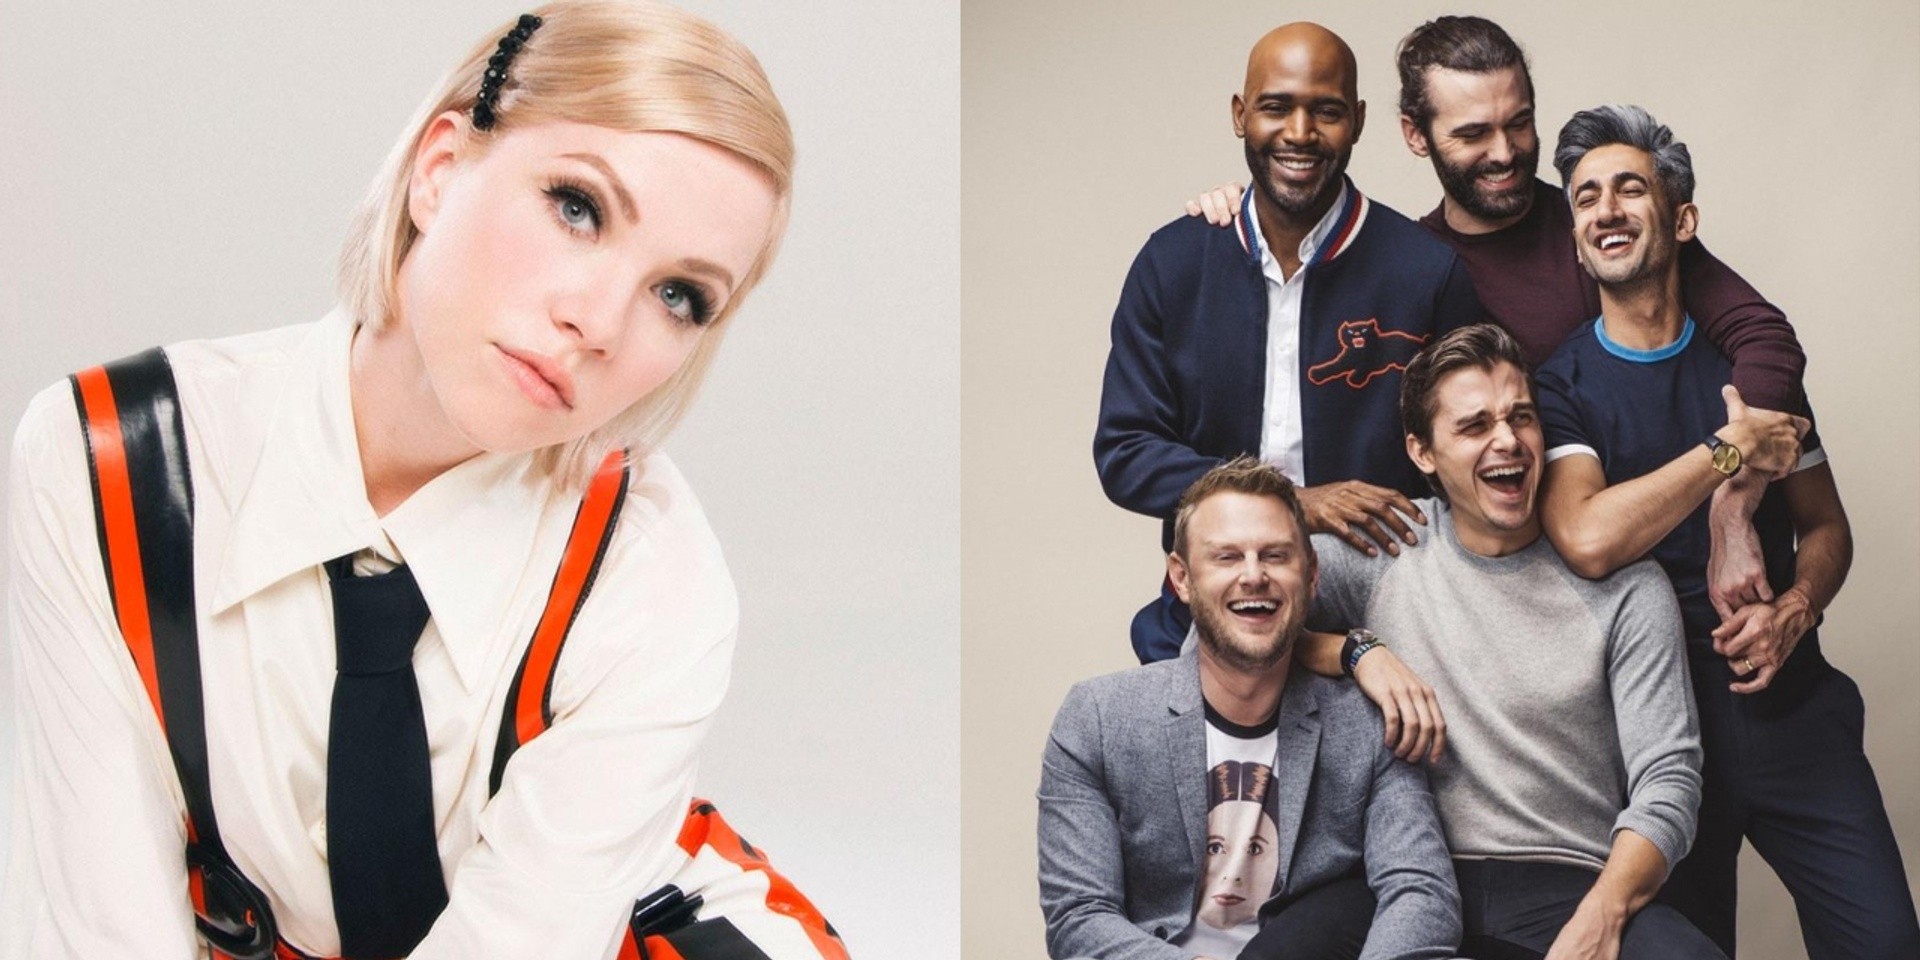 Carly Rae Jepsen previews new single 'Now That I Found You' in trailer for season 3 of Queer Eye